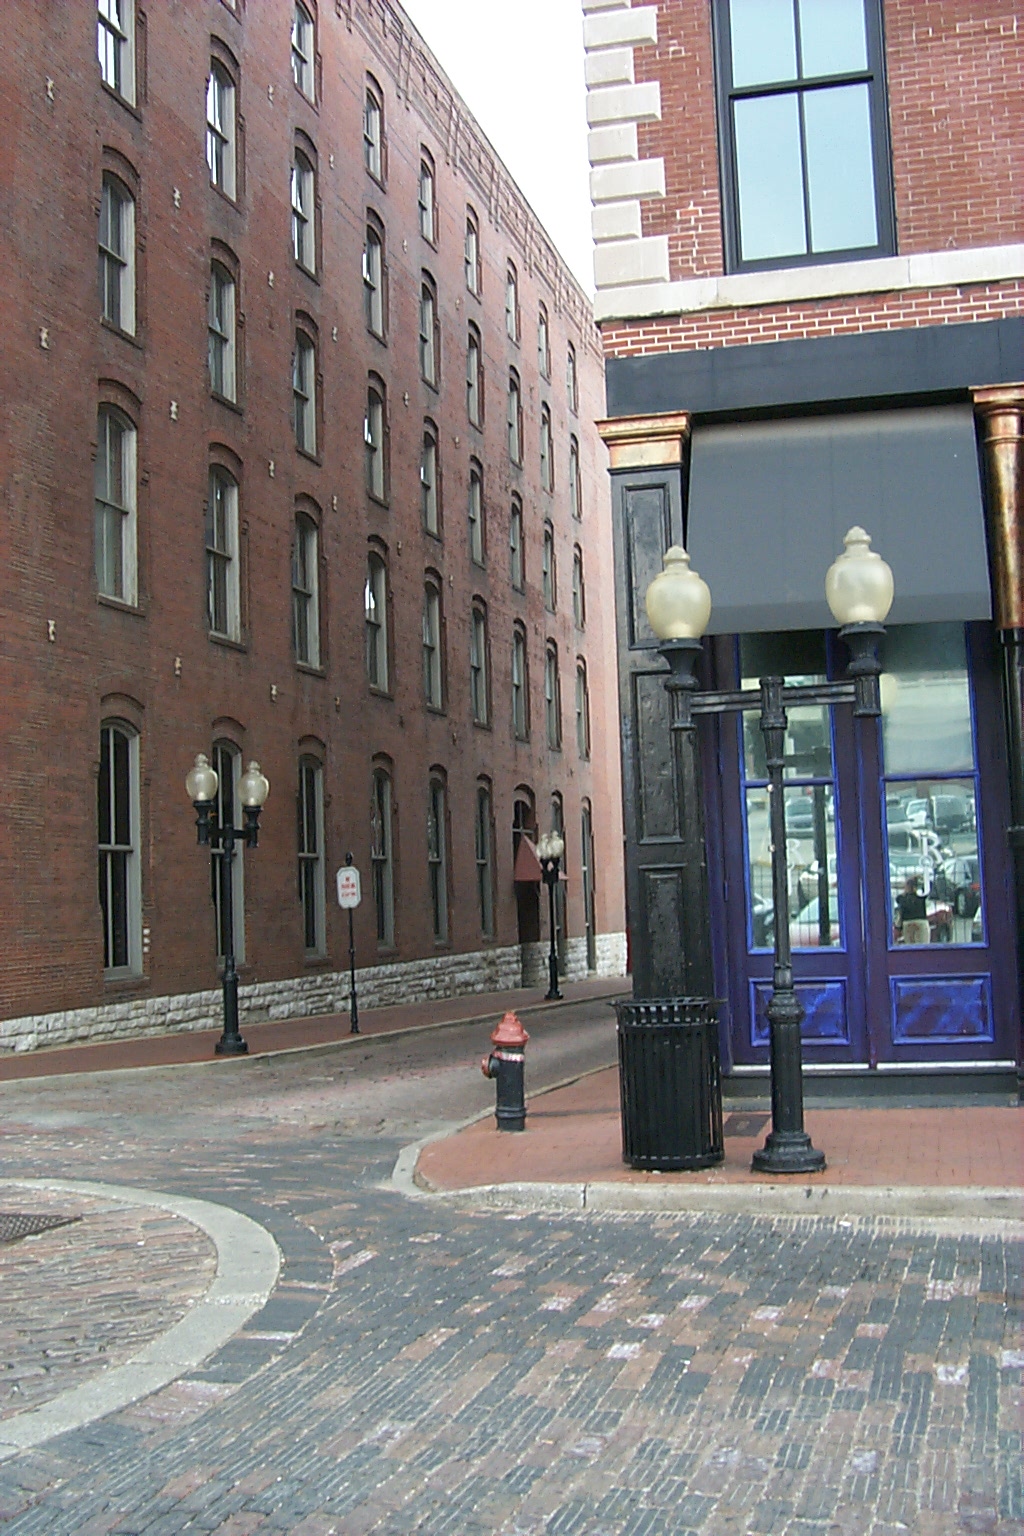 Mound Street & a Museum of the City of St. Louis